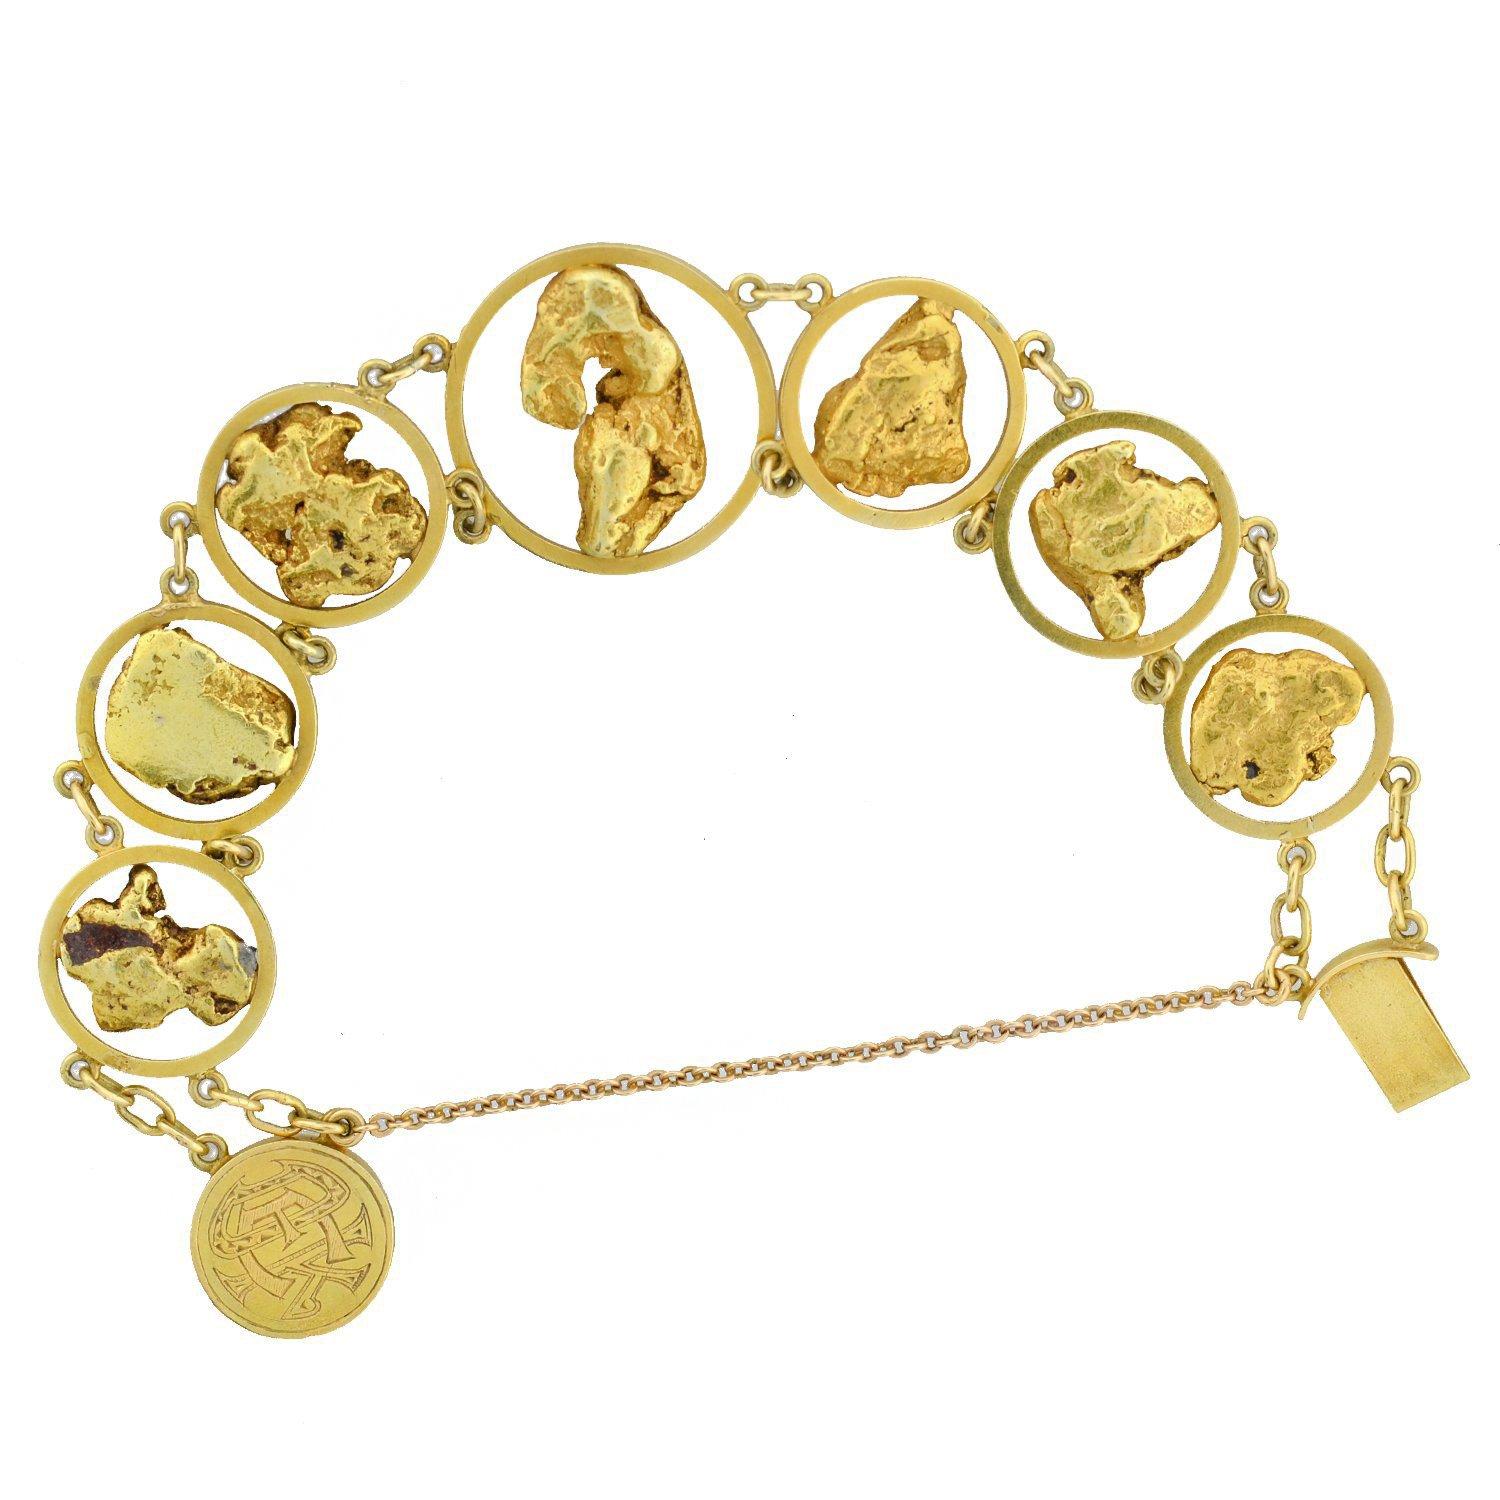 An incredible gold nugget bracelet from the Victorian (ca1880s) era! This unusual piece is crafted with 15kt yellow gold and adorns seven genuine 24kt yellow gold nuggets, which would have likely been collectable souvenirs from the Californian or